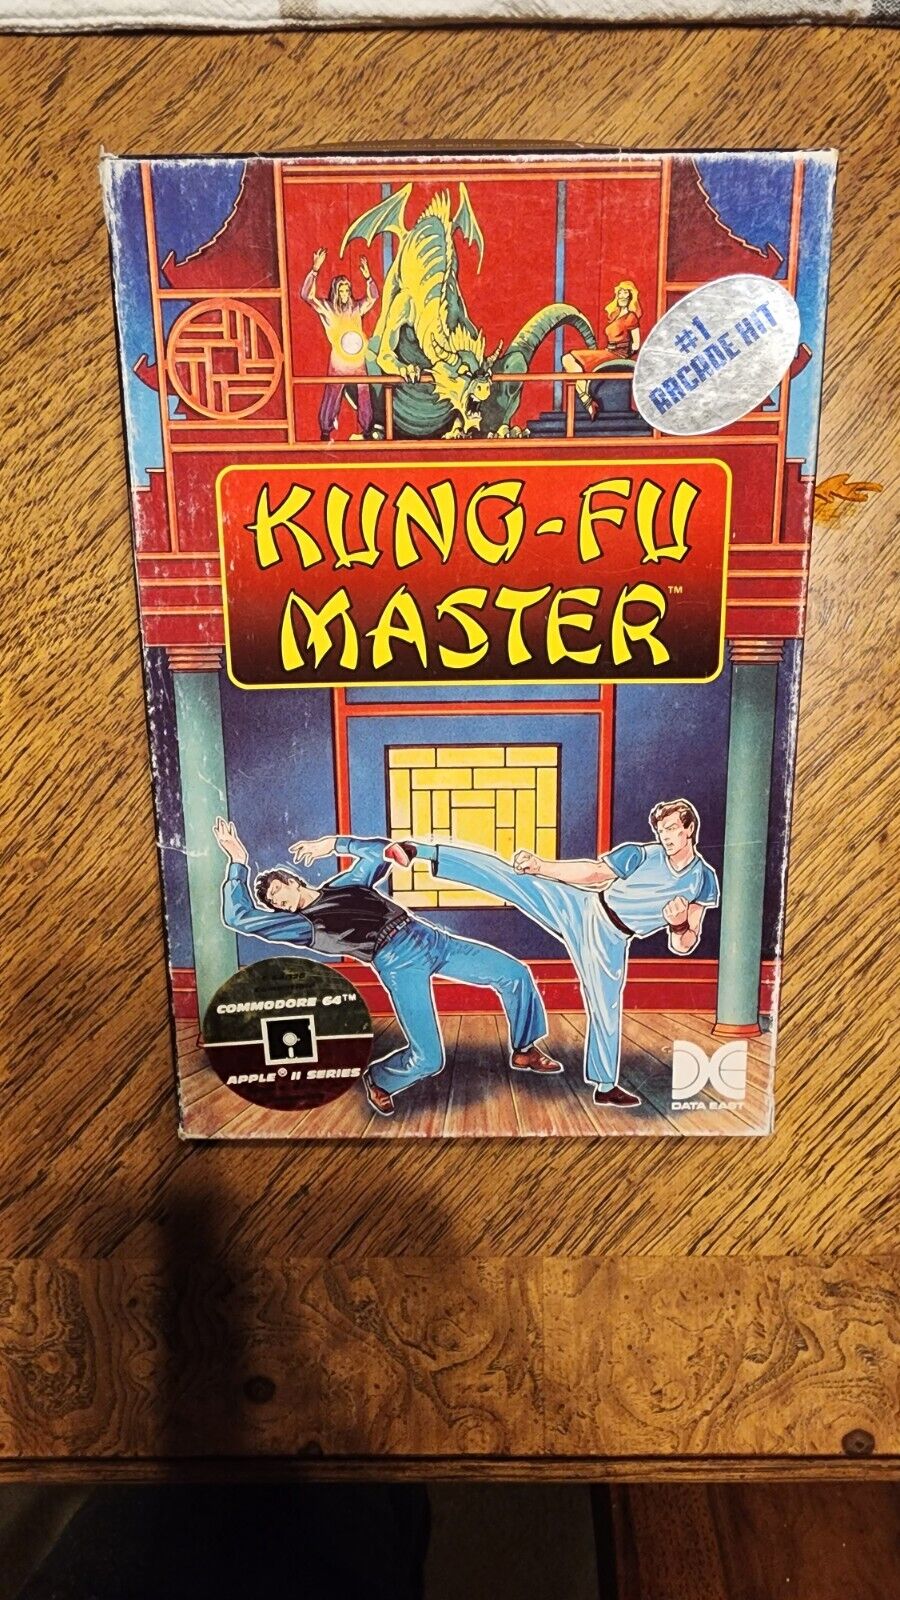 Vintage Commodore Software KUNG-FU MASTER Data East 1984 Apple